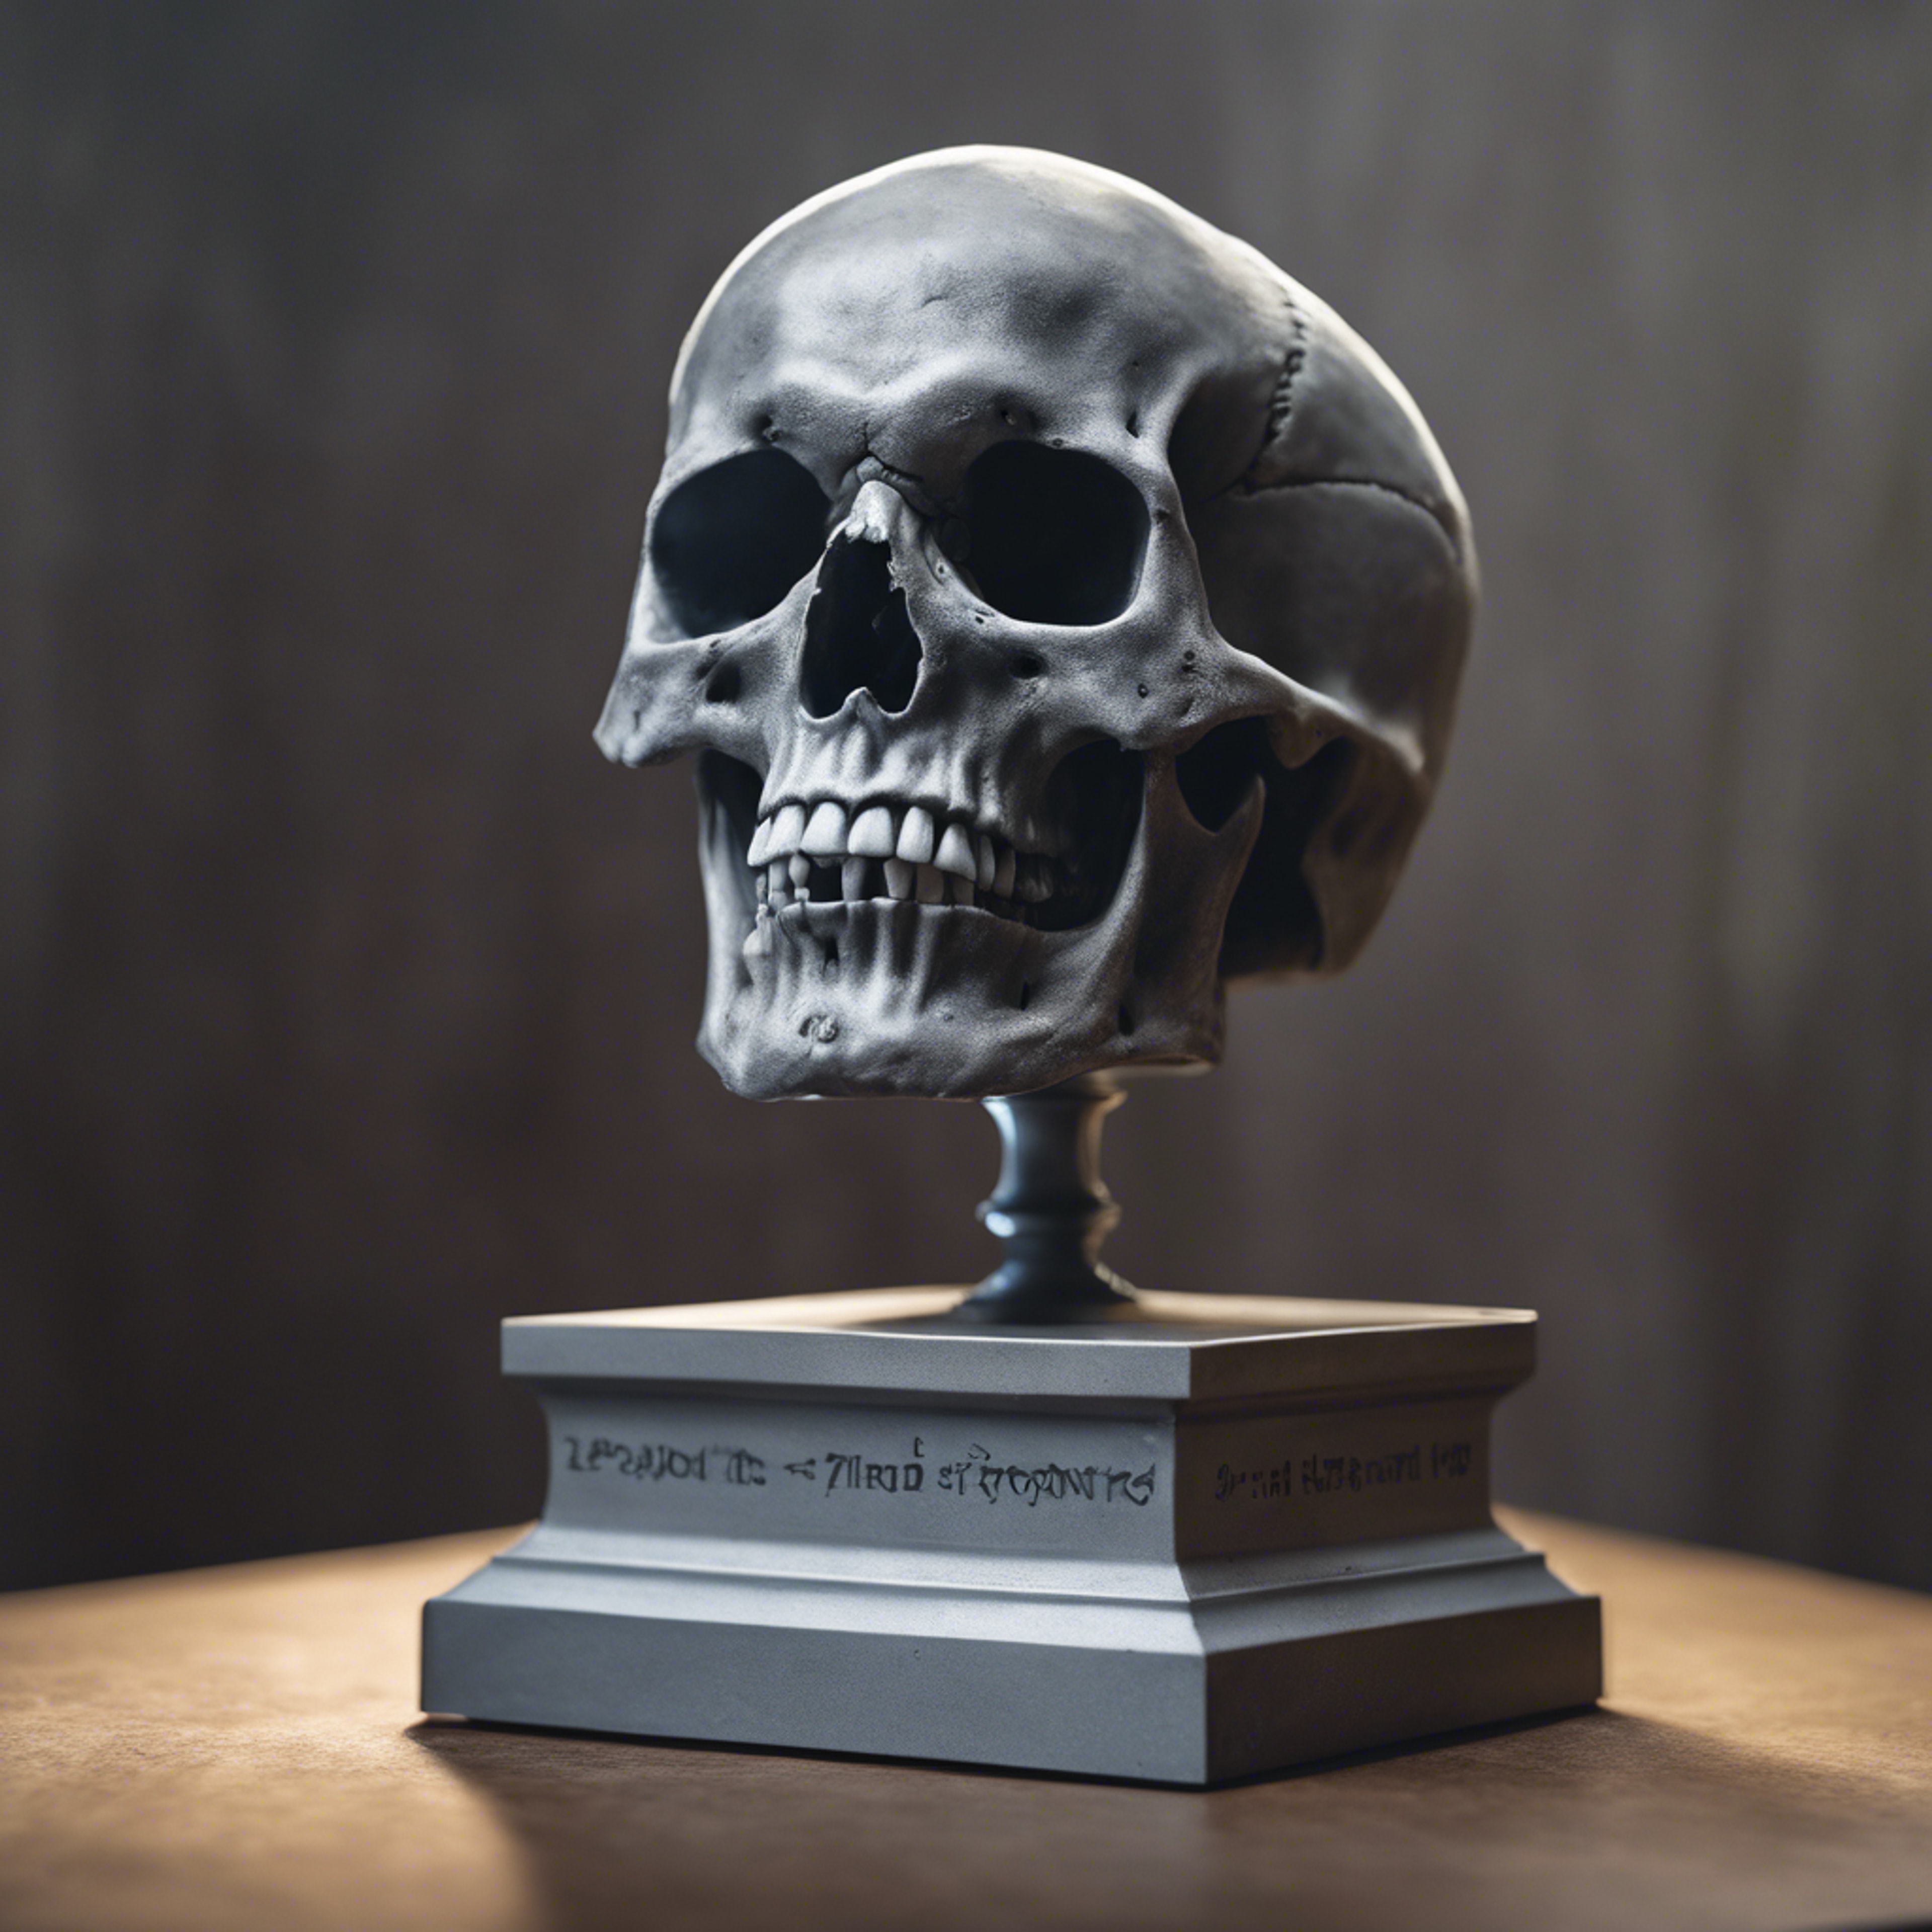 A spot-lit gray skull on a pedestal, starring in a classic horror movie scene. Wallpaper[96b08be545414606ae5a]